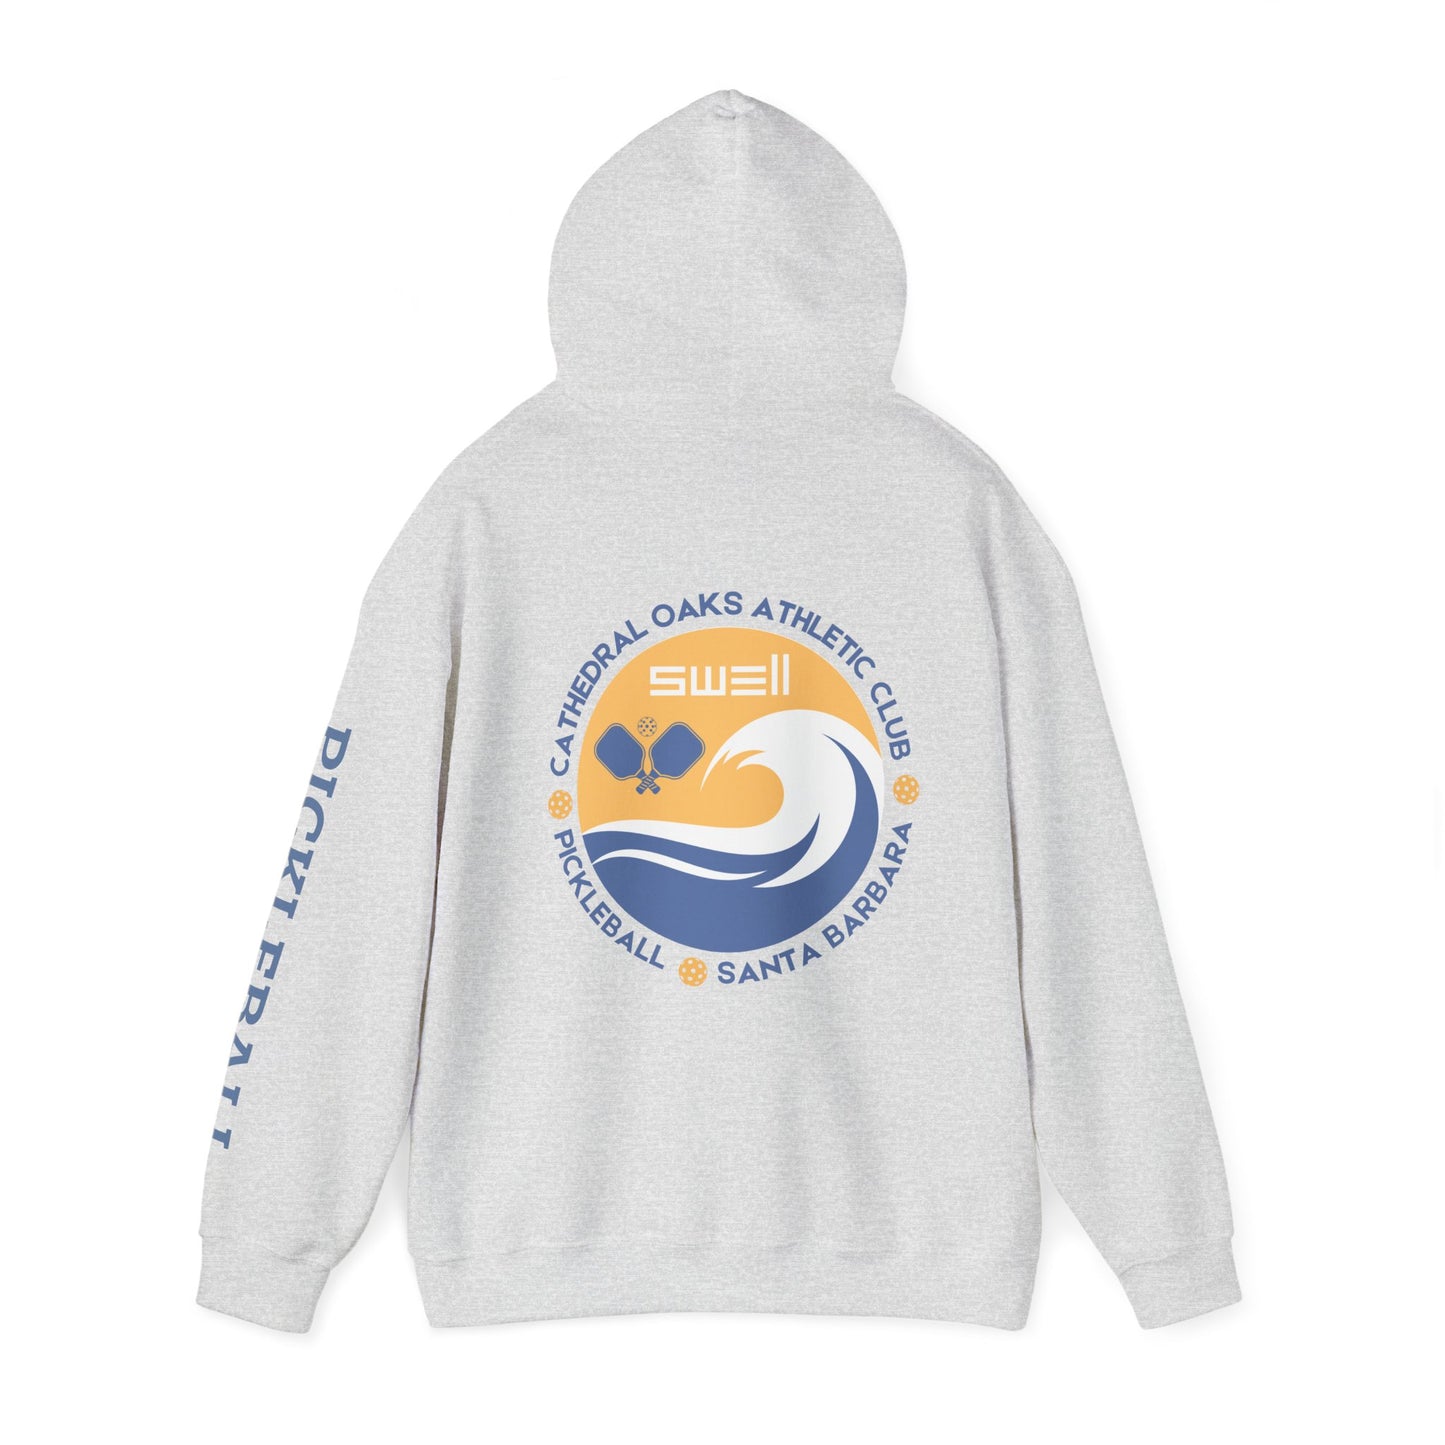 Cathedral Oaks - SWELL - Unisex Hoodie - can add name to fron, back r sleeve